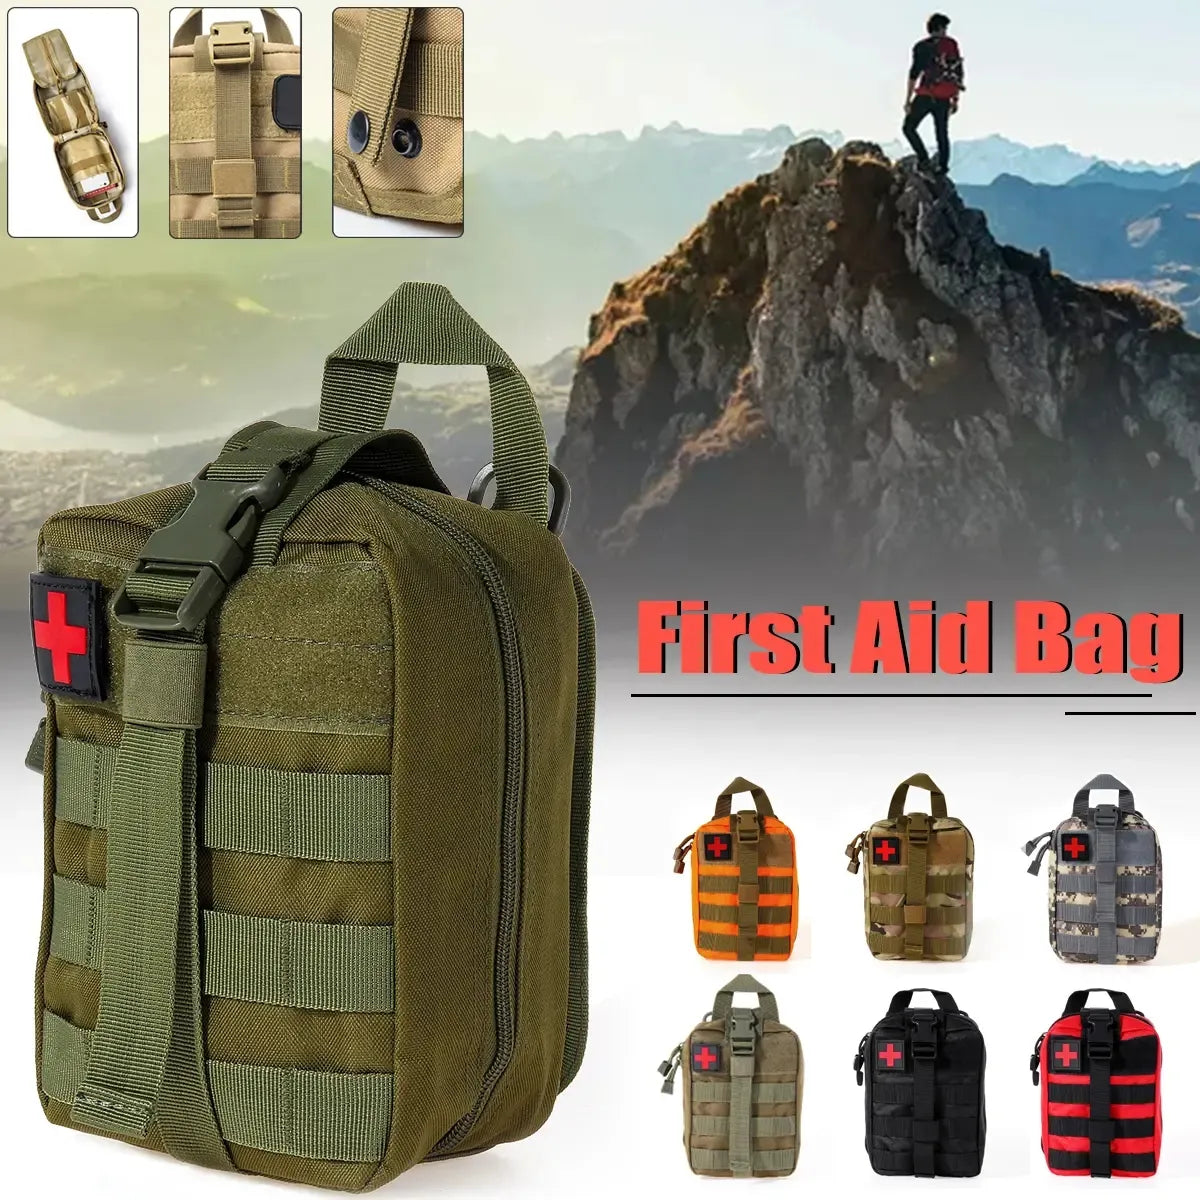 Tactical First Aid Kit Waist Bag Emergency Travel Survival Rescue Handbag Waterproof Camping First Aid Pouch Patch Bag Case